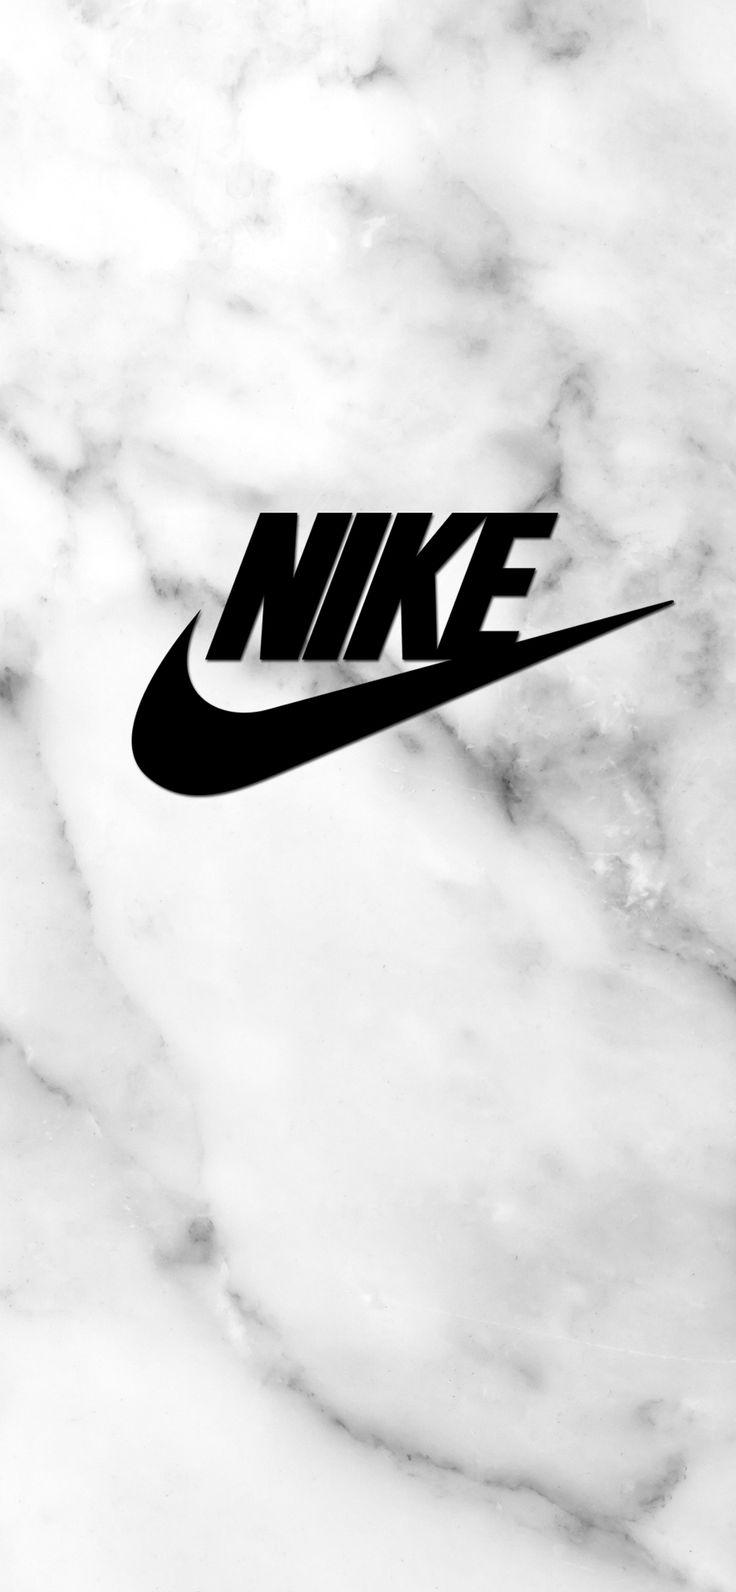 Nike iPhone X Wallpaper You Can Order Case With This